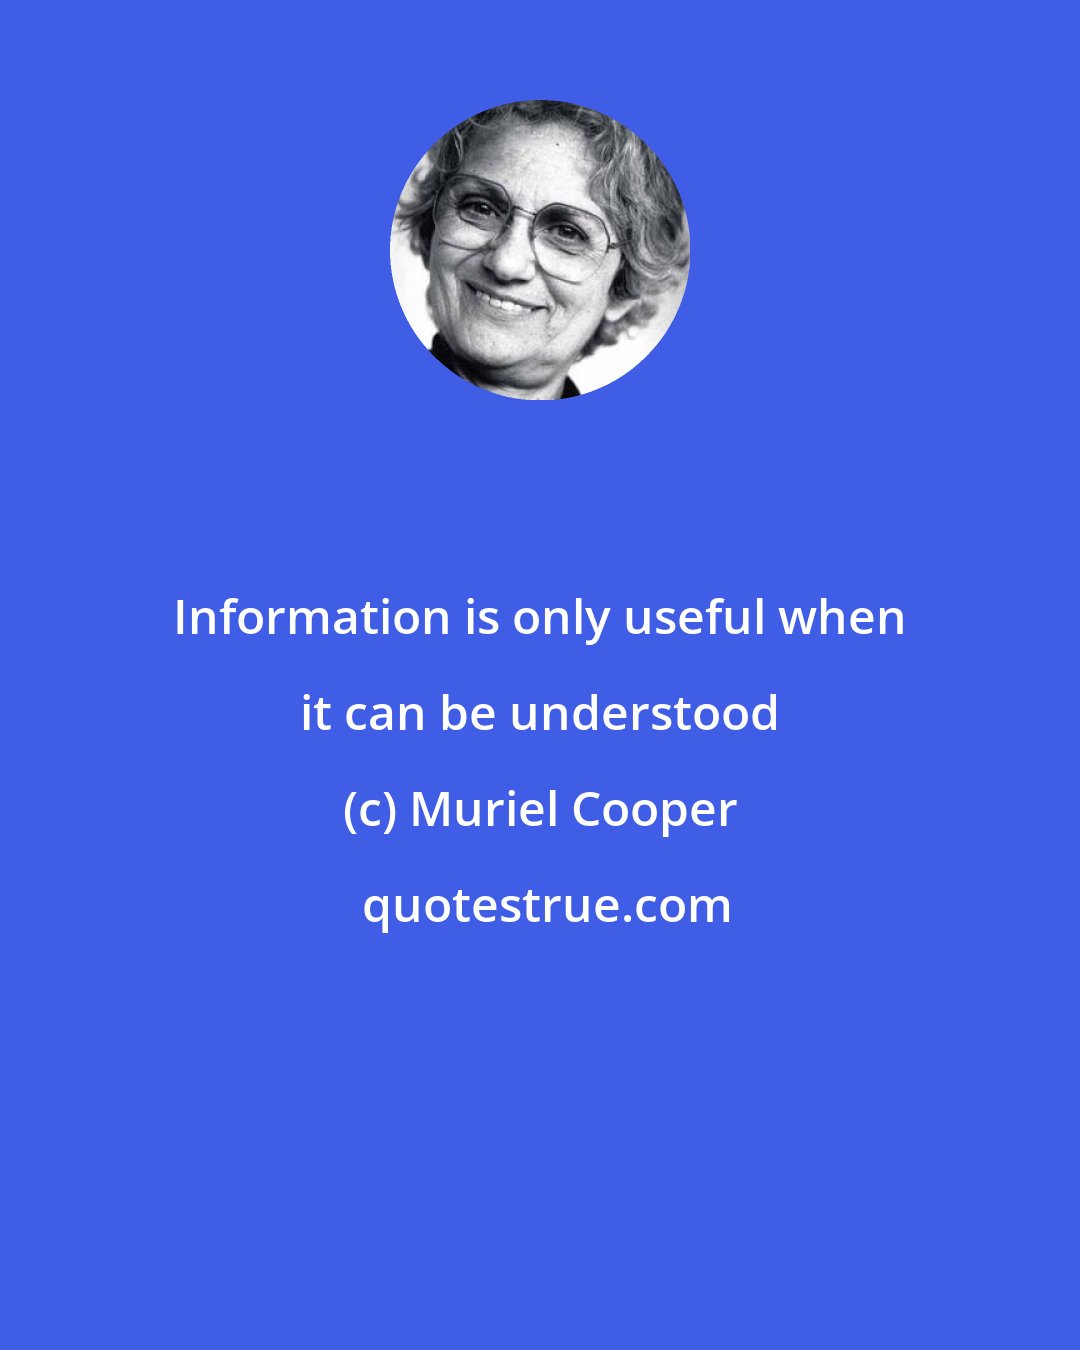 Muriel Cooper: Information is only useful when it can be understood